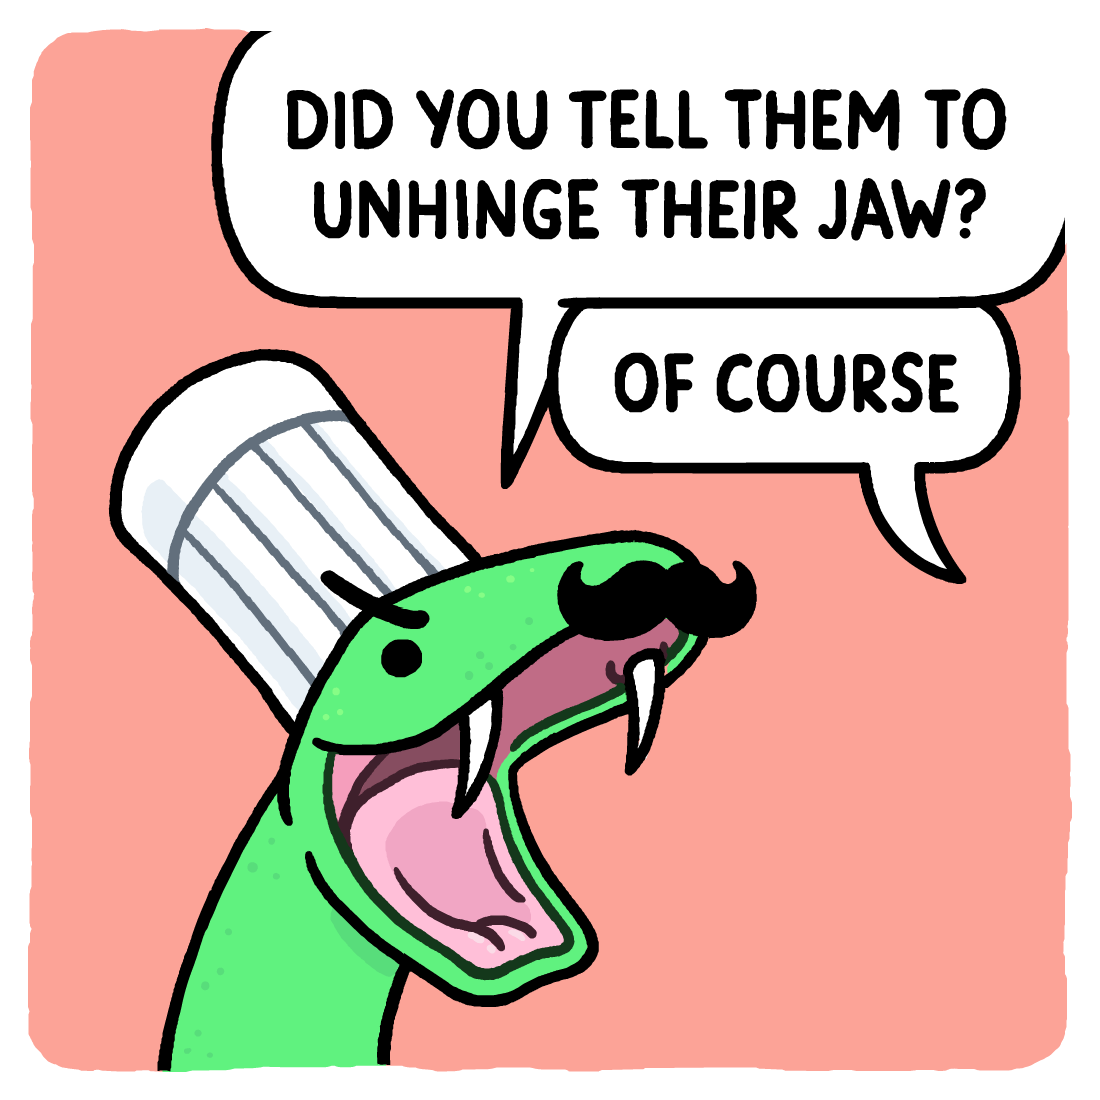 "Did you tell them to unhinge their jaw?" "Of course"